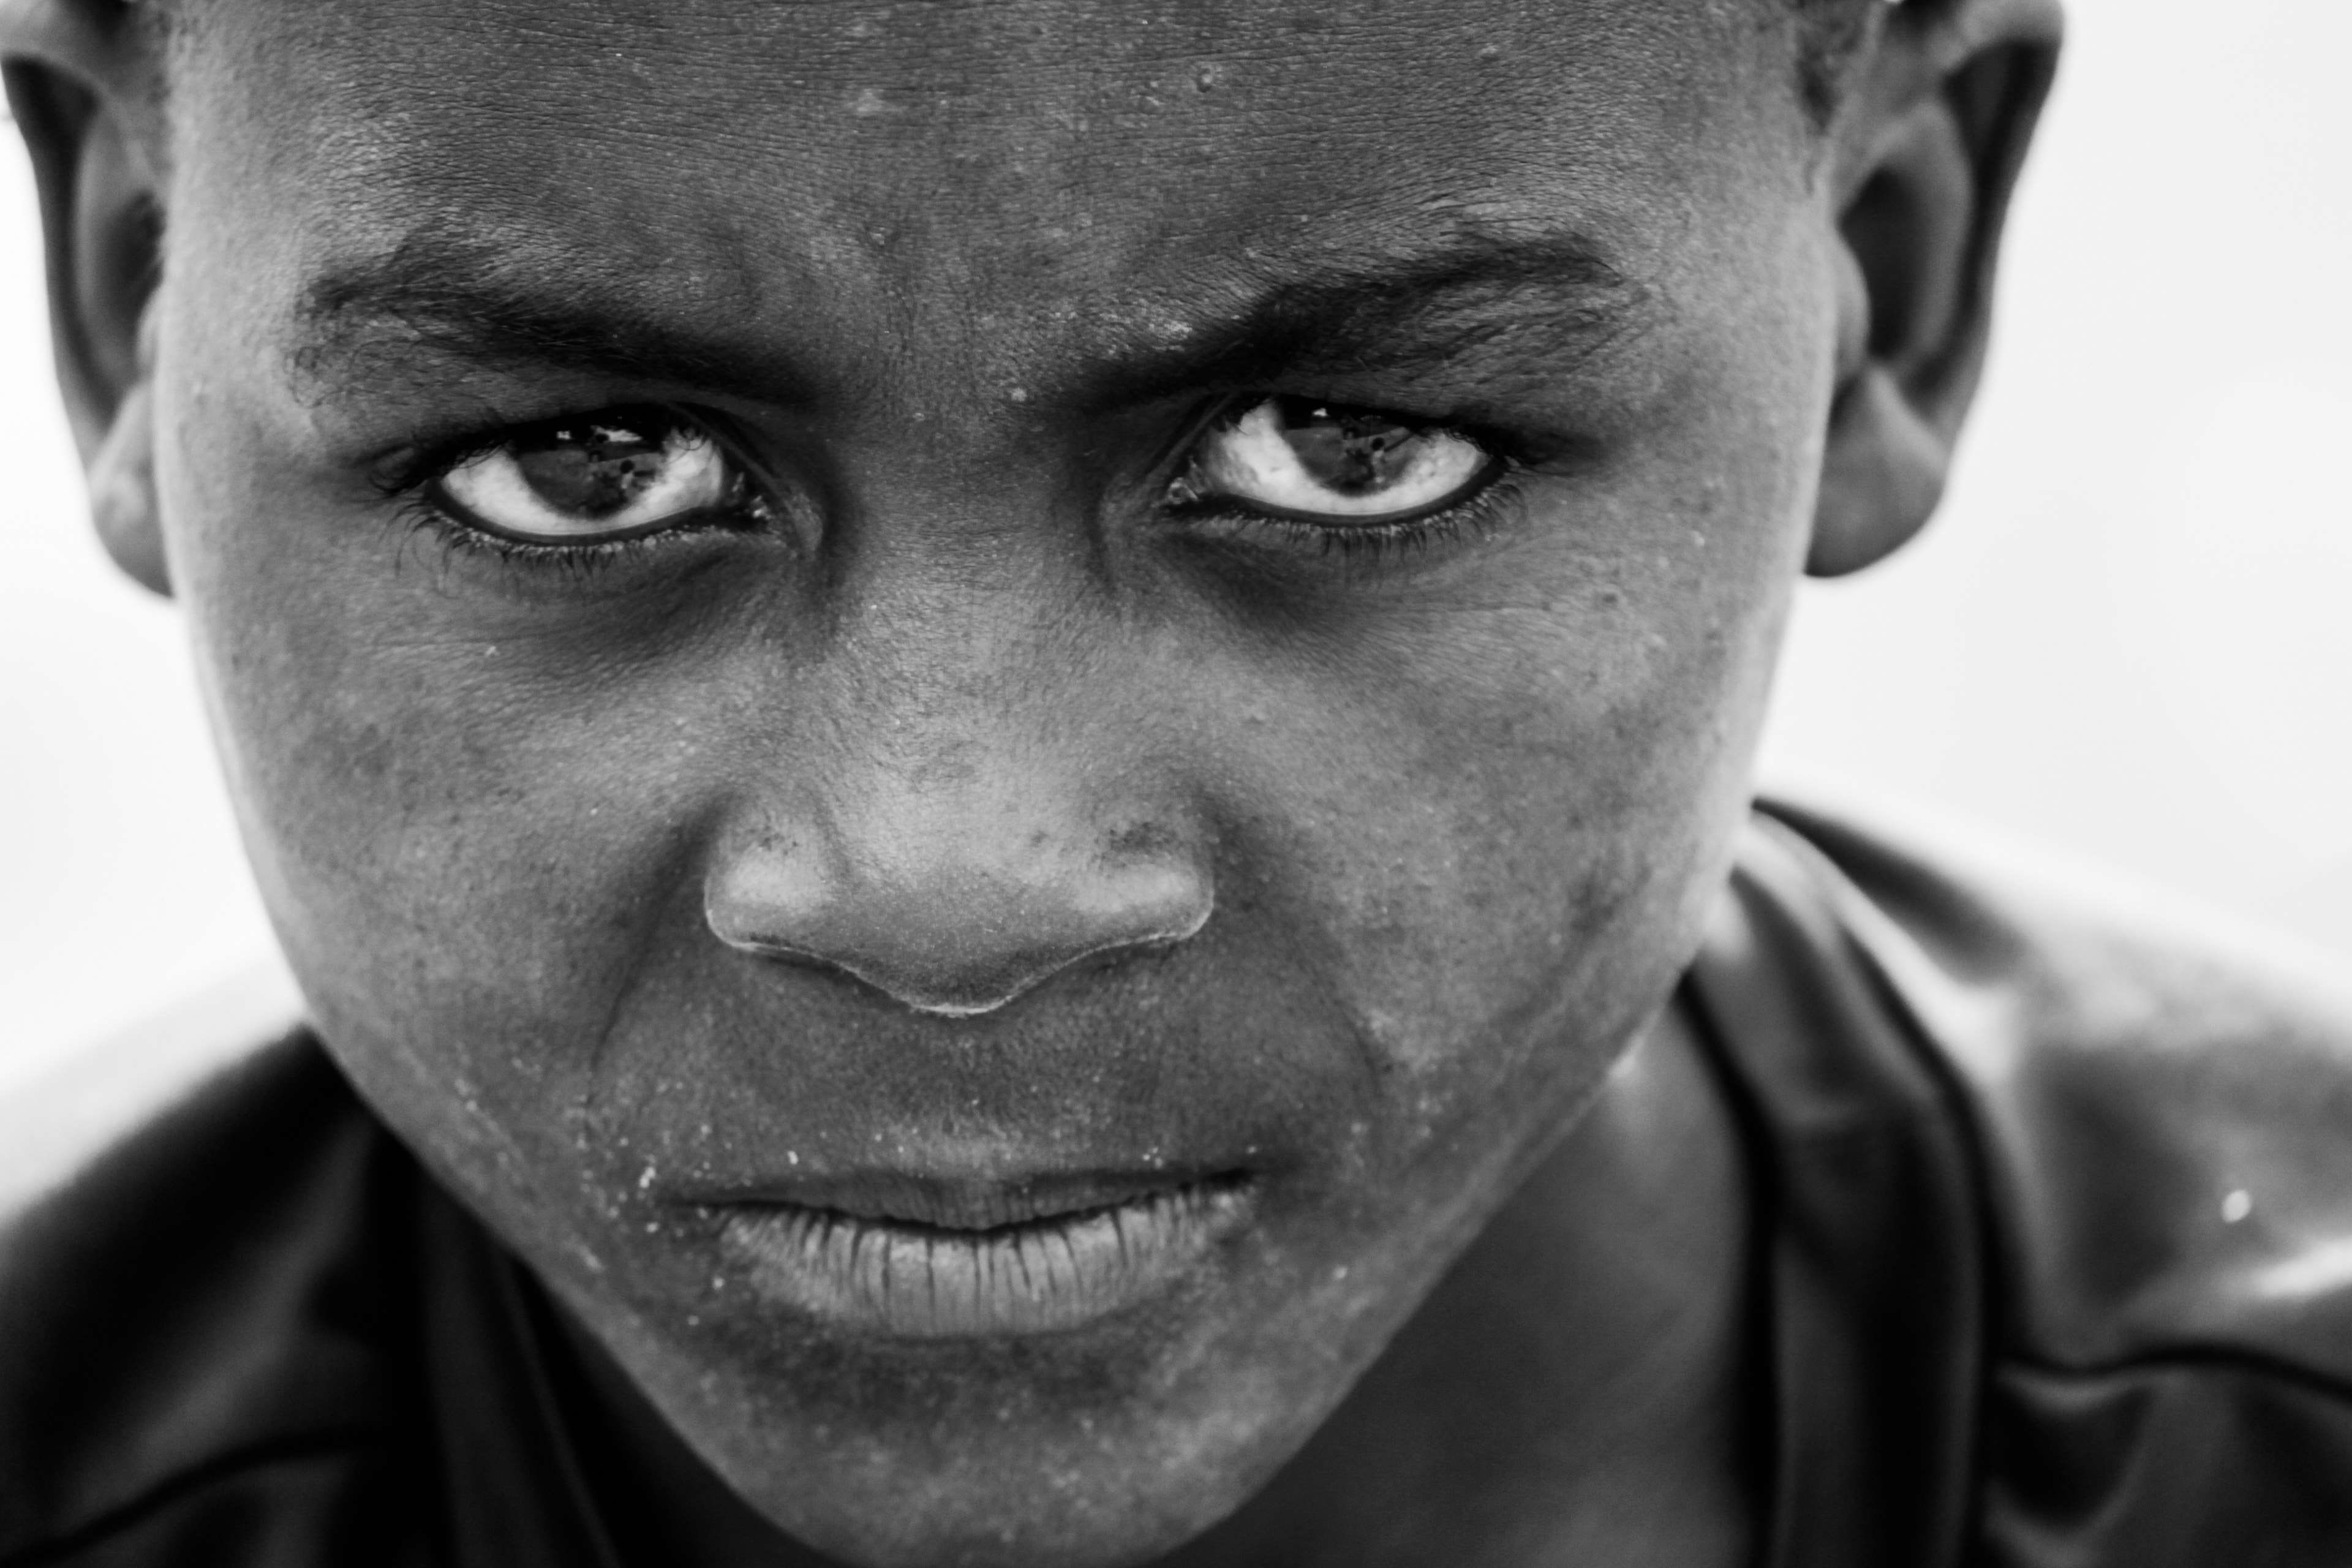 alone, angry, black and white, boy, child, close up, dirty